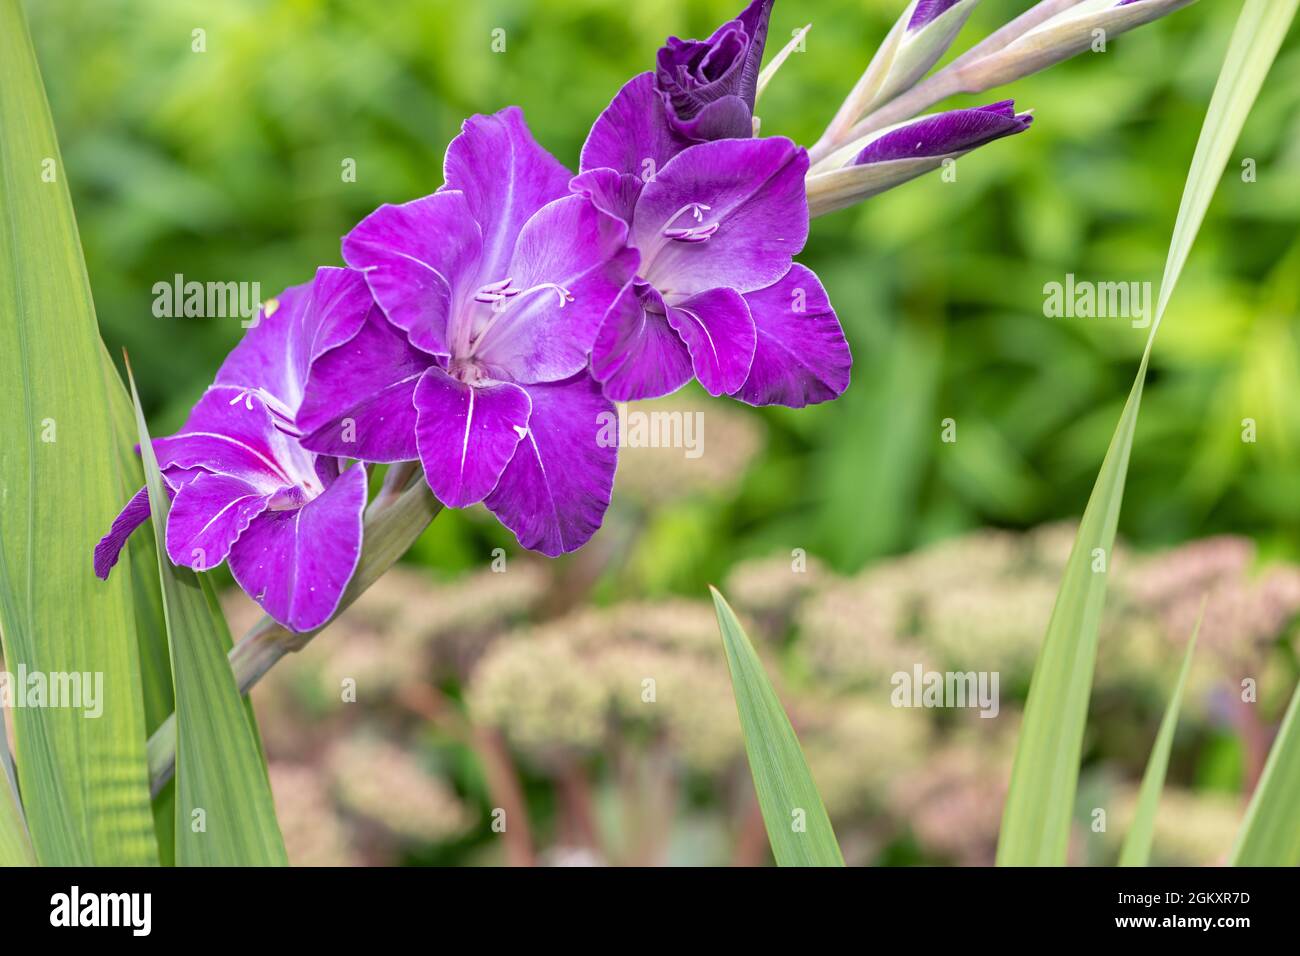 Close up of purple gladiolus flowers in bloom Stock Photo